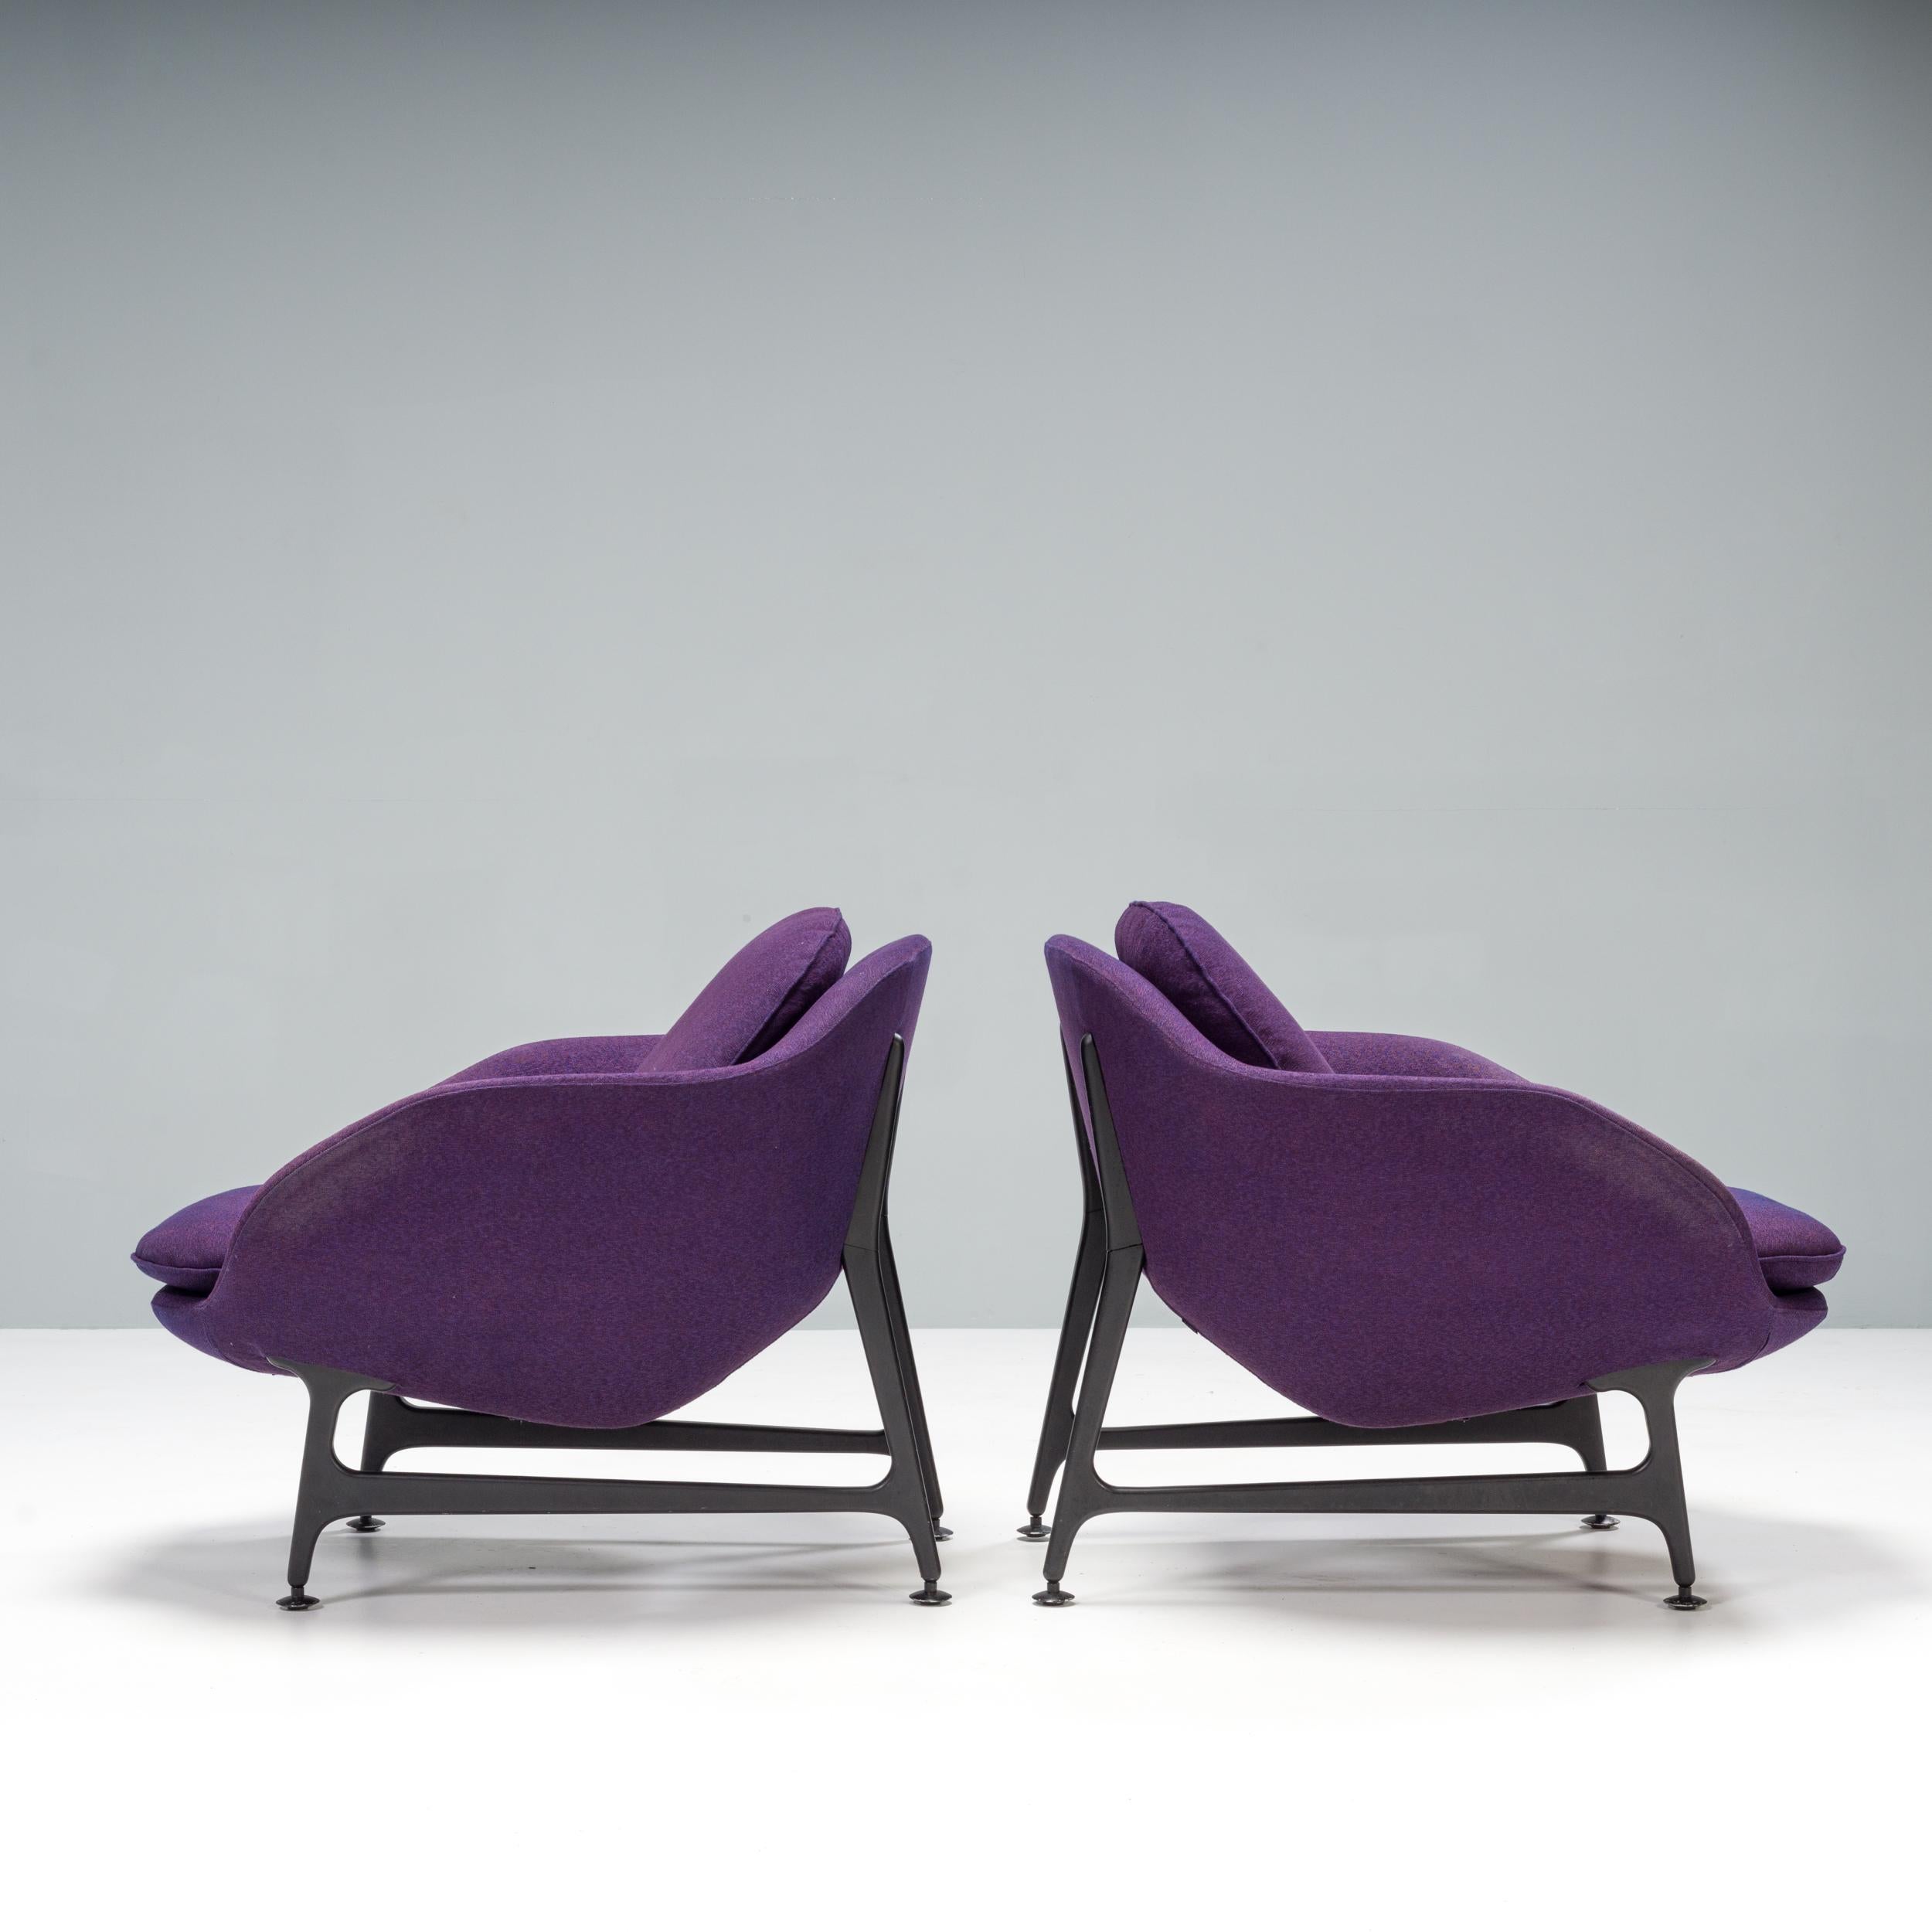 Contemporary Cassina by Jaime Hayon Vico Purple Armchairs, Set of 2 For Sale